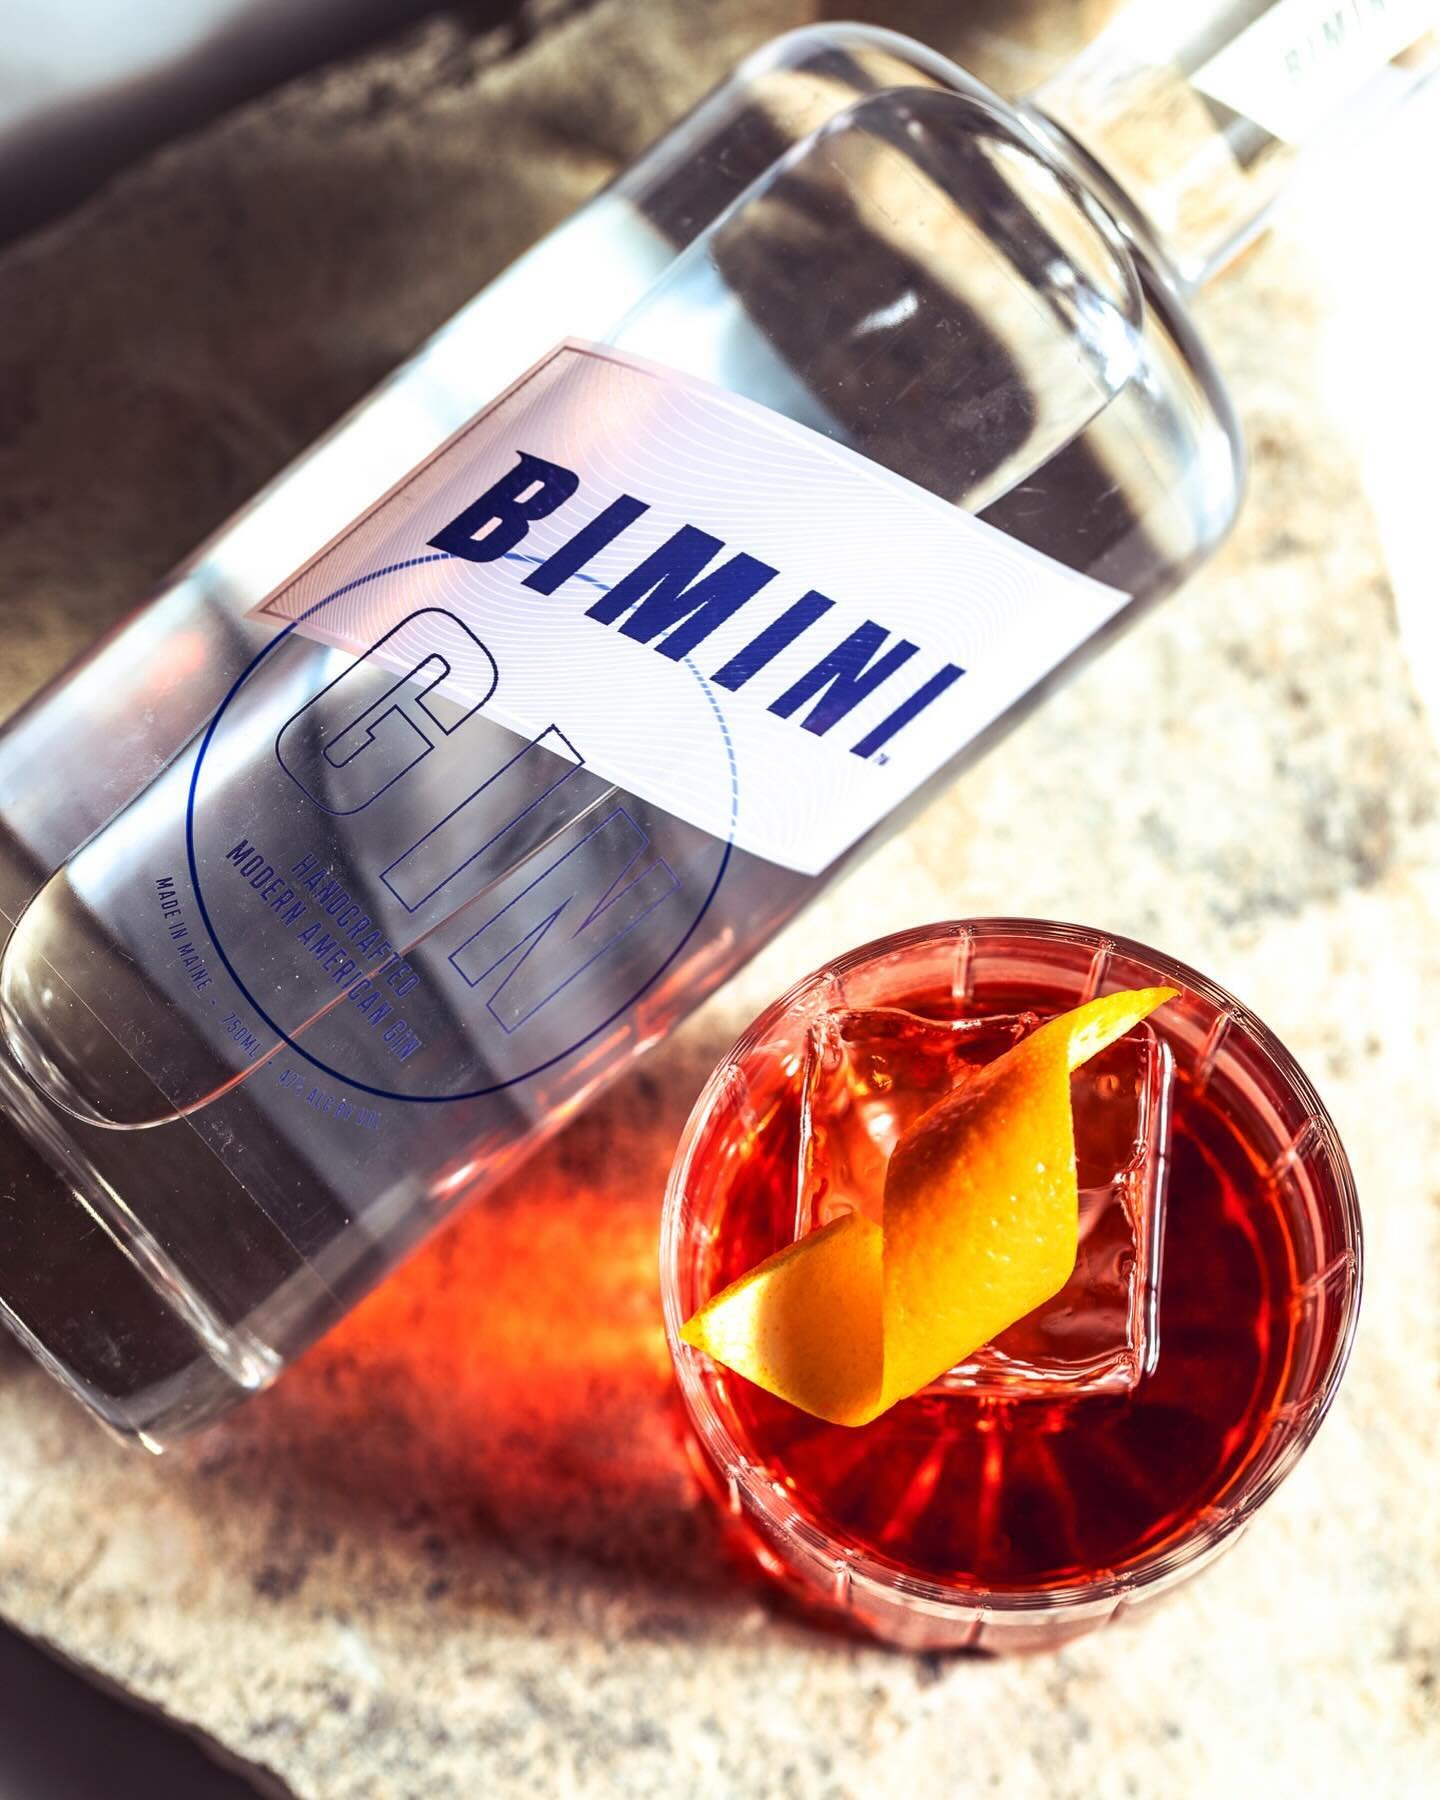 Been waiting all week for Friday aperitivo hour on the patio? A classic Negroni is the perfect choice to enjoy while relaxing with friends. With a bright citrusy profile, fresh juniper backbone, and sweet floral notes of hops and chamomile, Bimini Gi